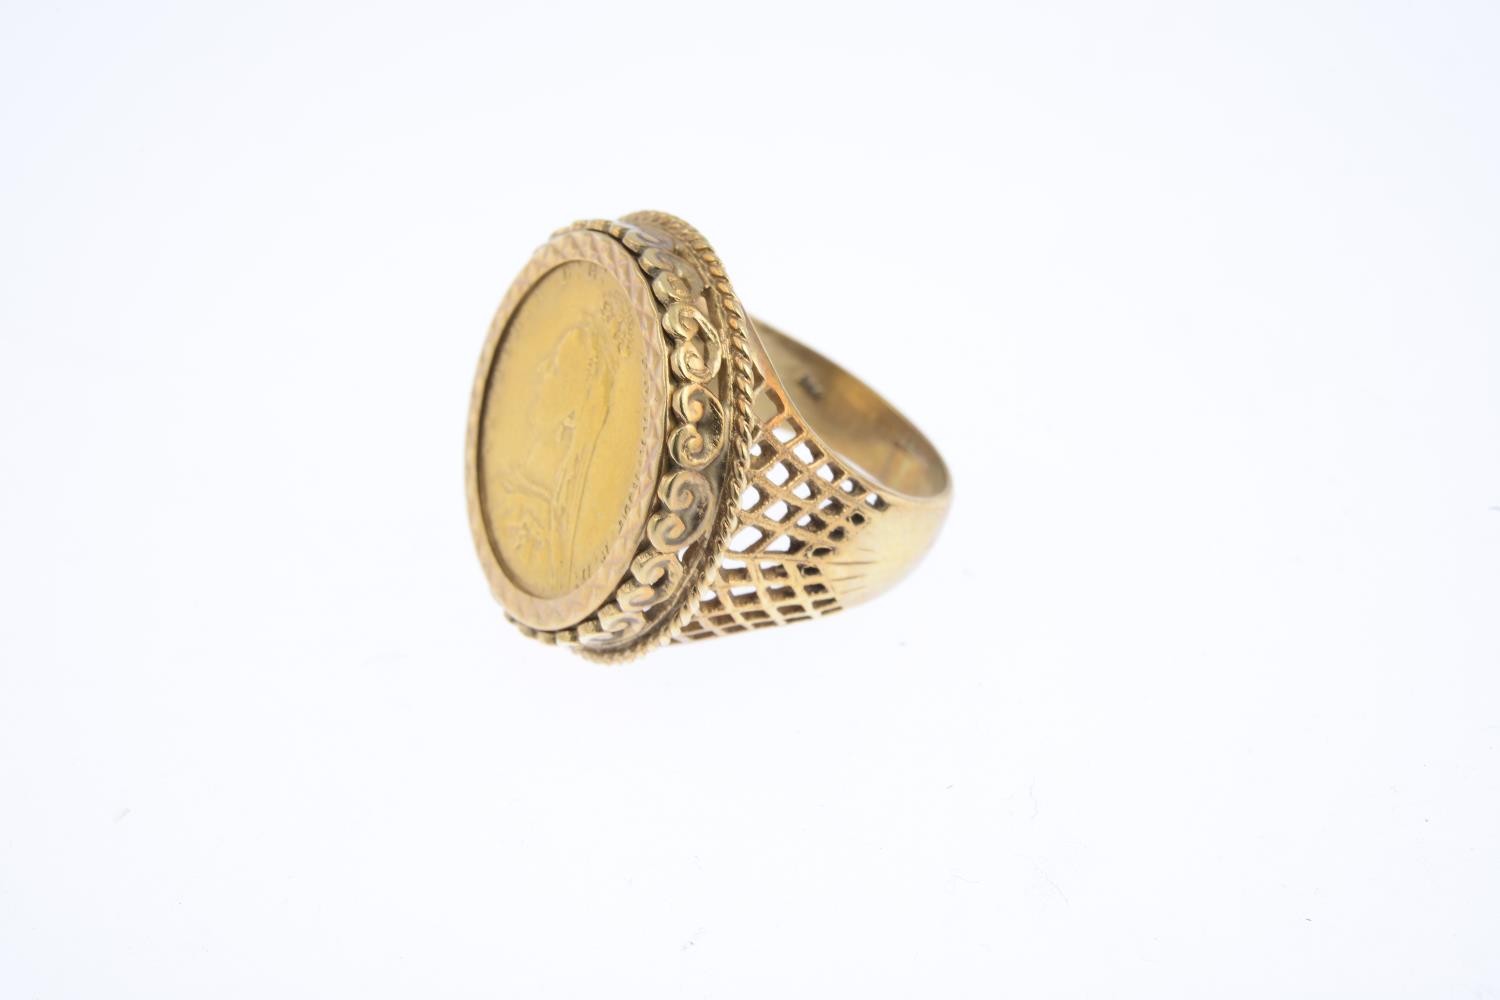 (209869) A 9ct gold mounted full sovereign ring. - Image 3 of 3